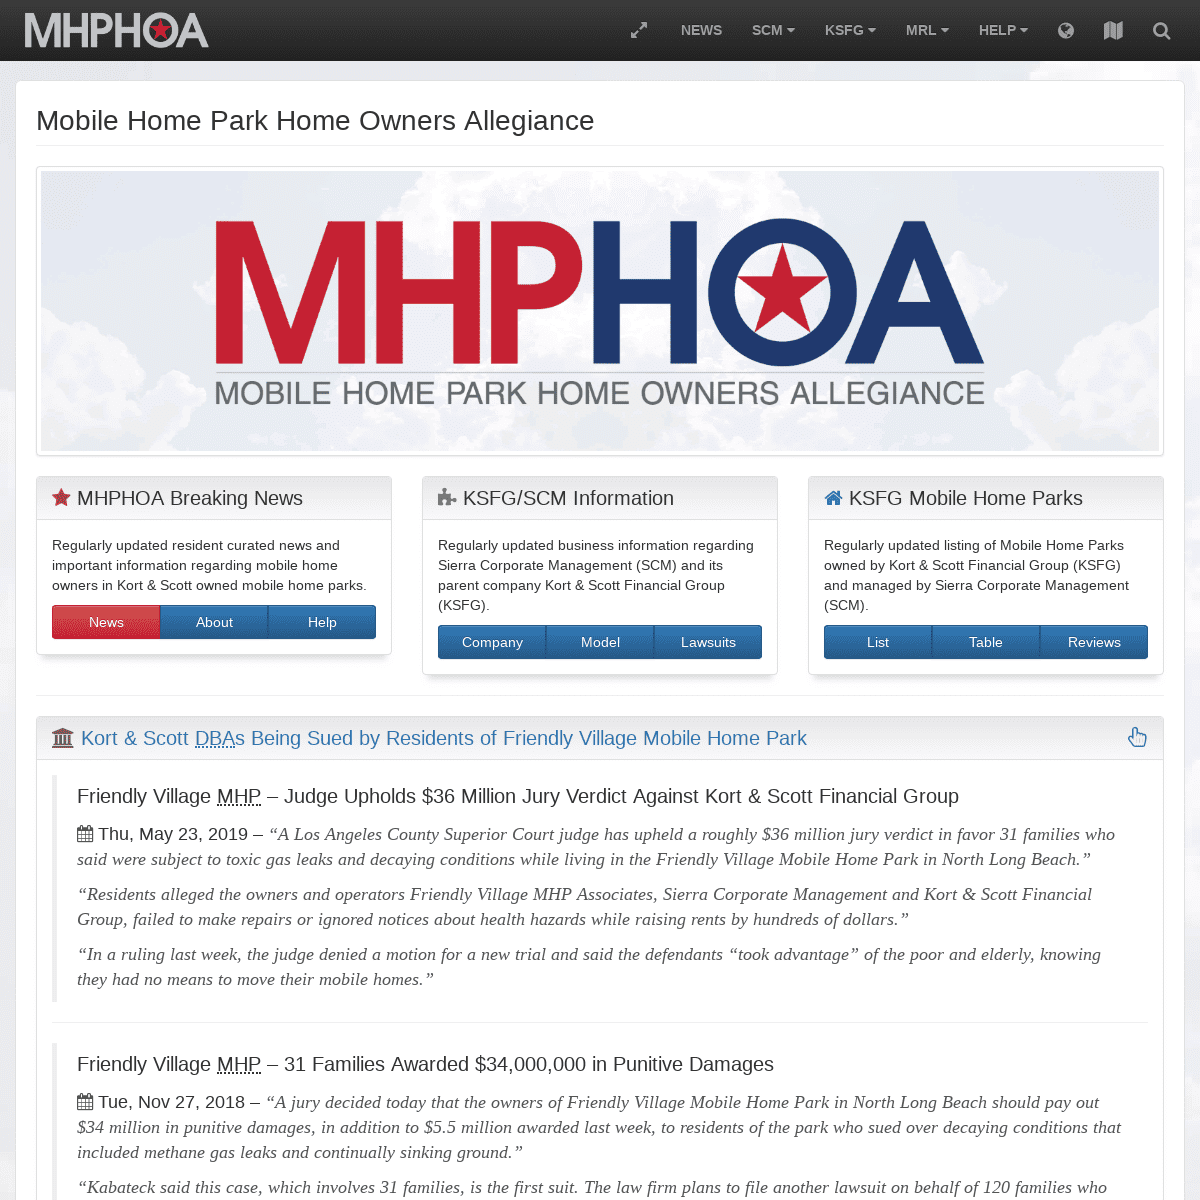 Mobile Home Park Home Owners Allegiance (MHPHOA)